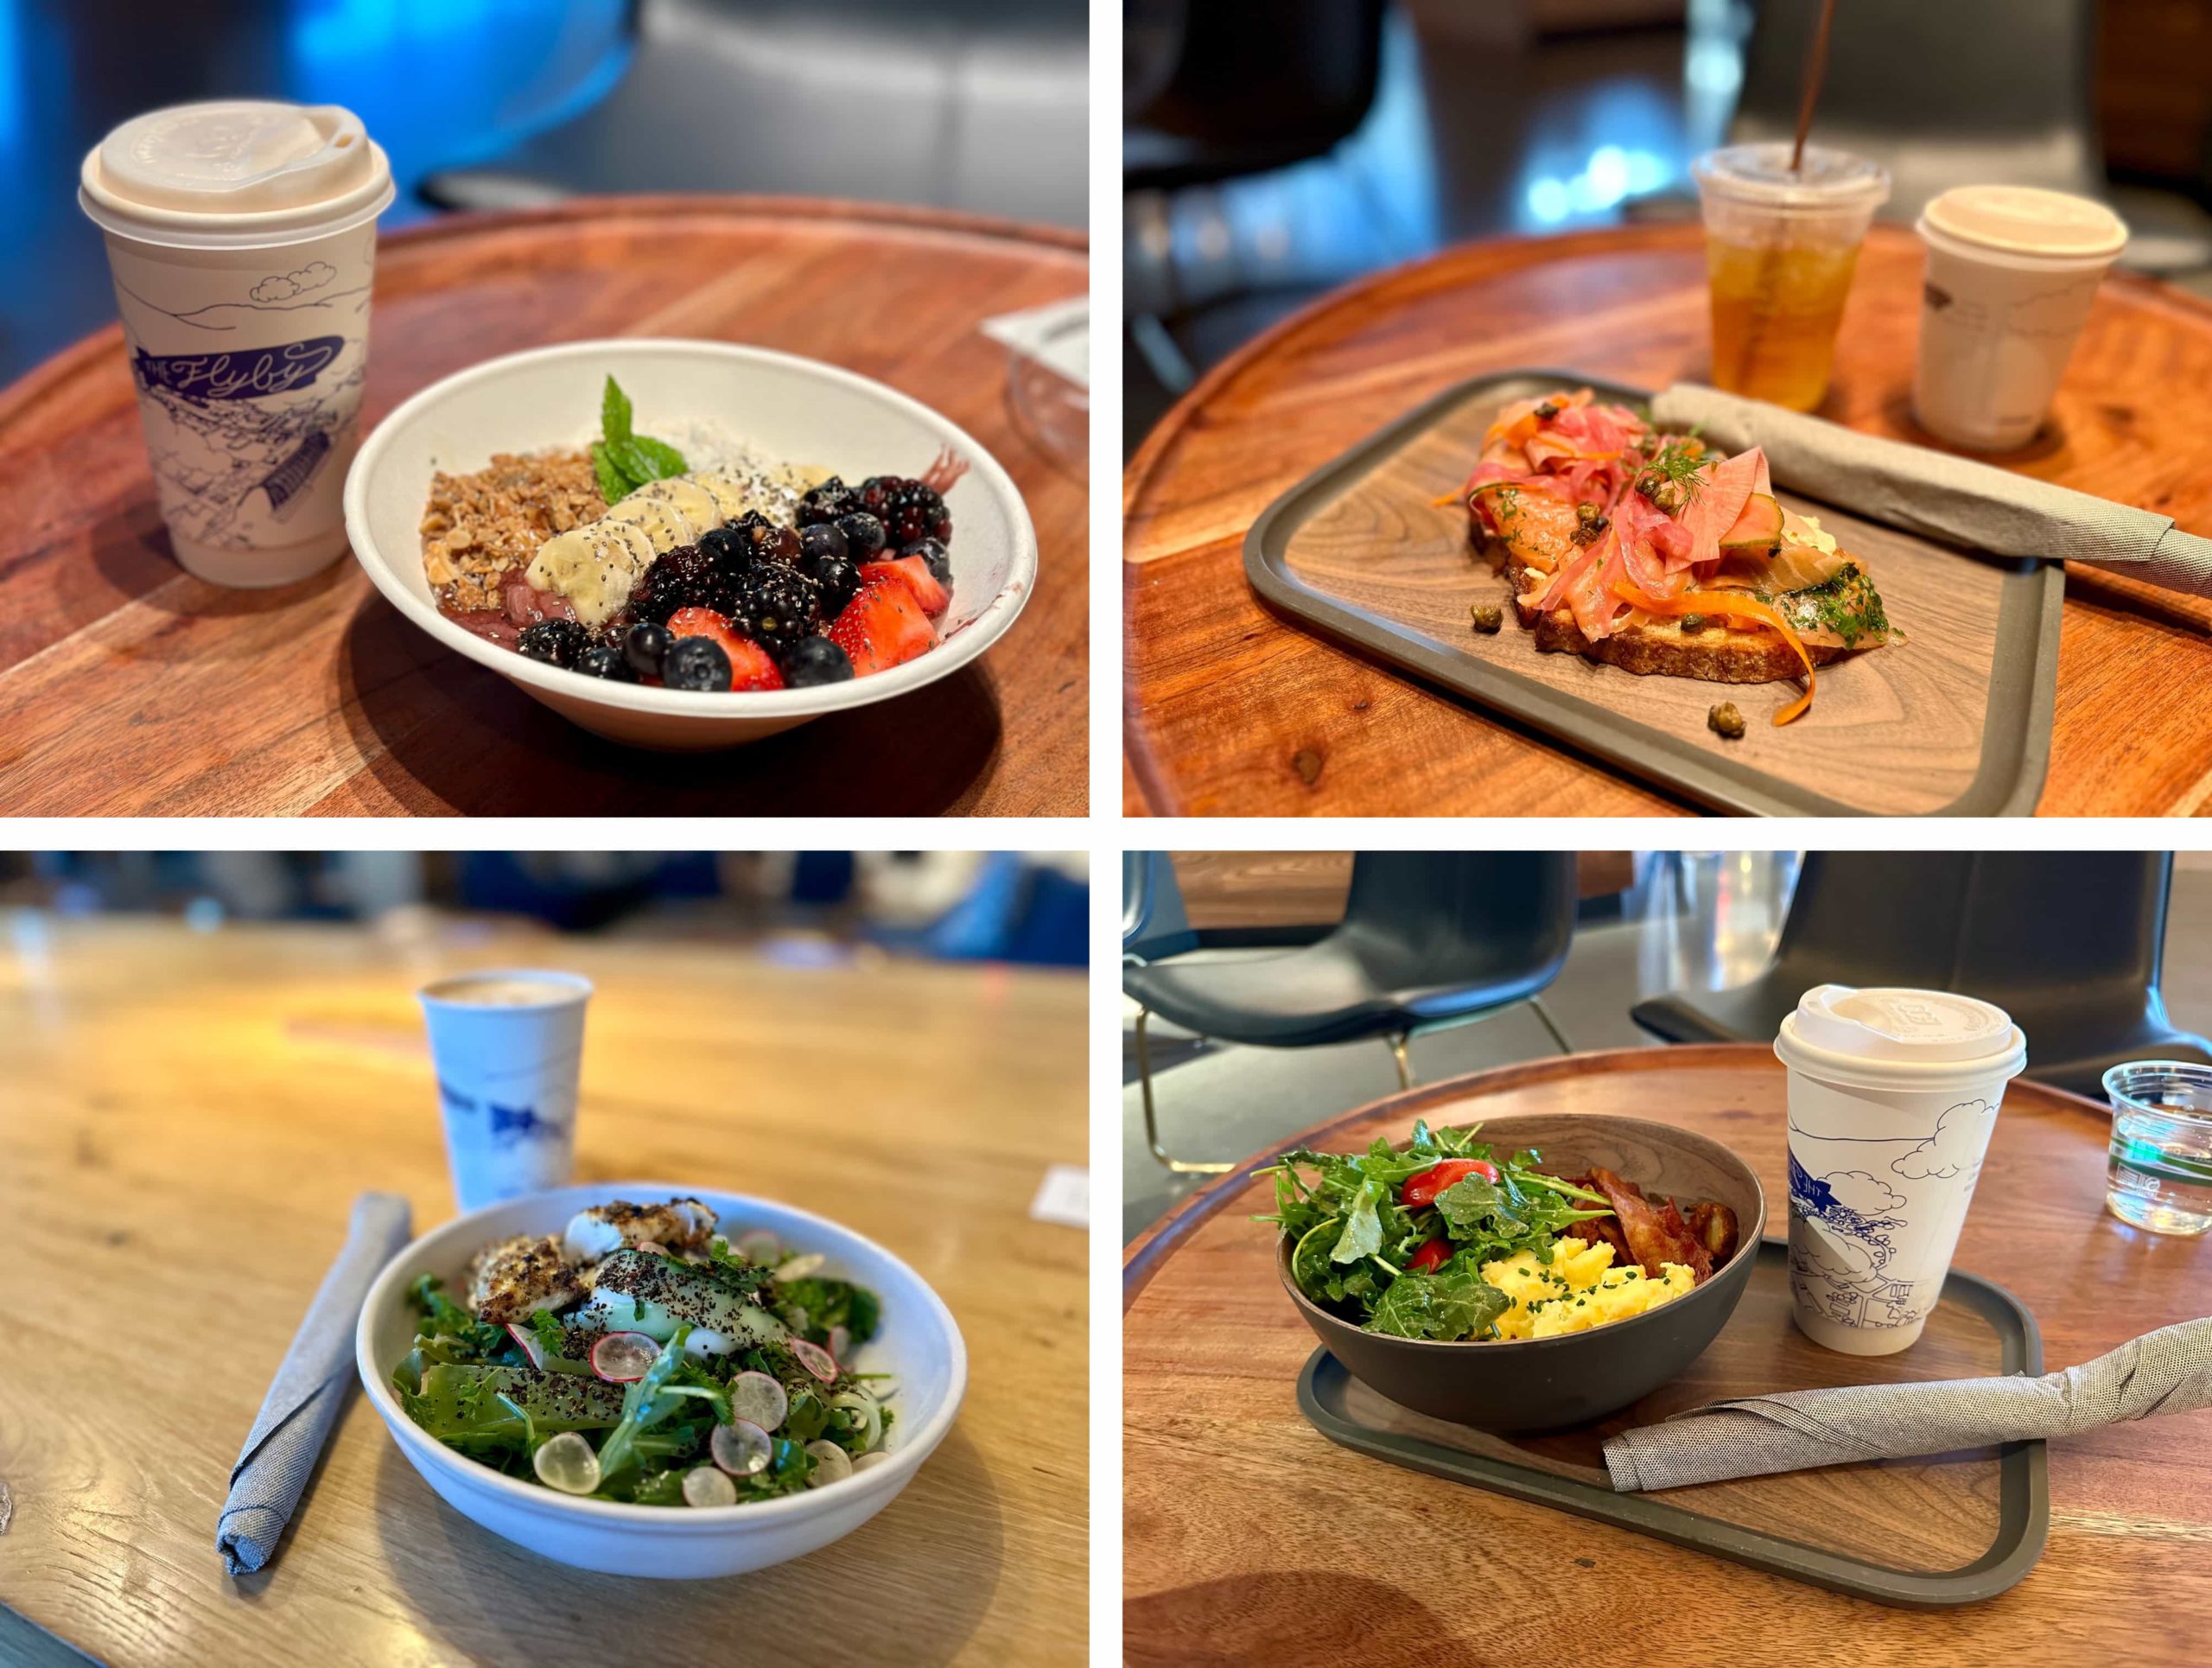 Four dishes of food: an açai bowl, salmon tartine, chicken and watermelon salad, and an all-American breakfast